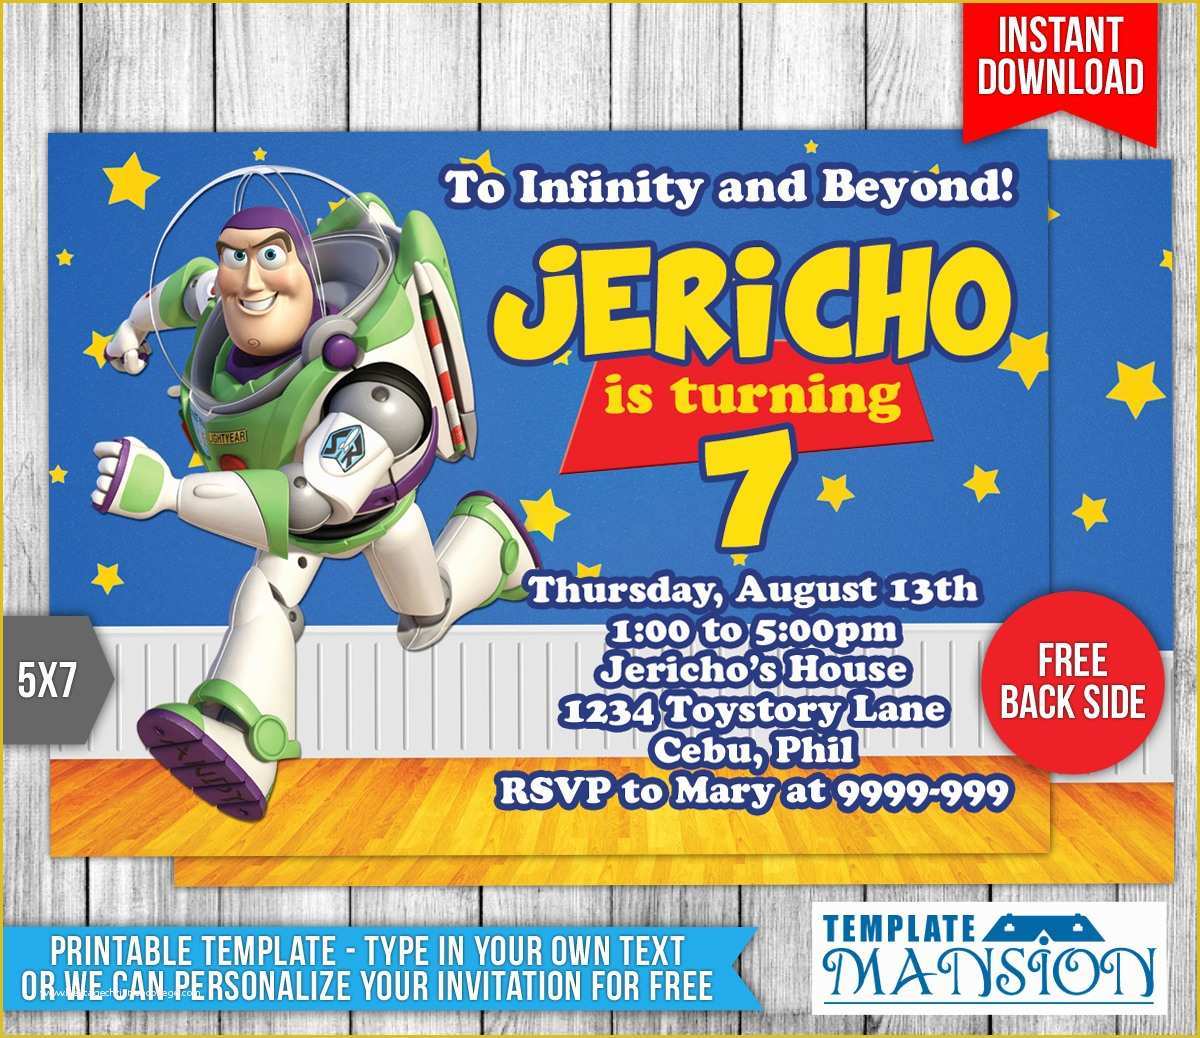 Toy Story Invitation Template Free Download Of Buzz Lightyear toy Story Birthday Invitation by